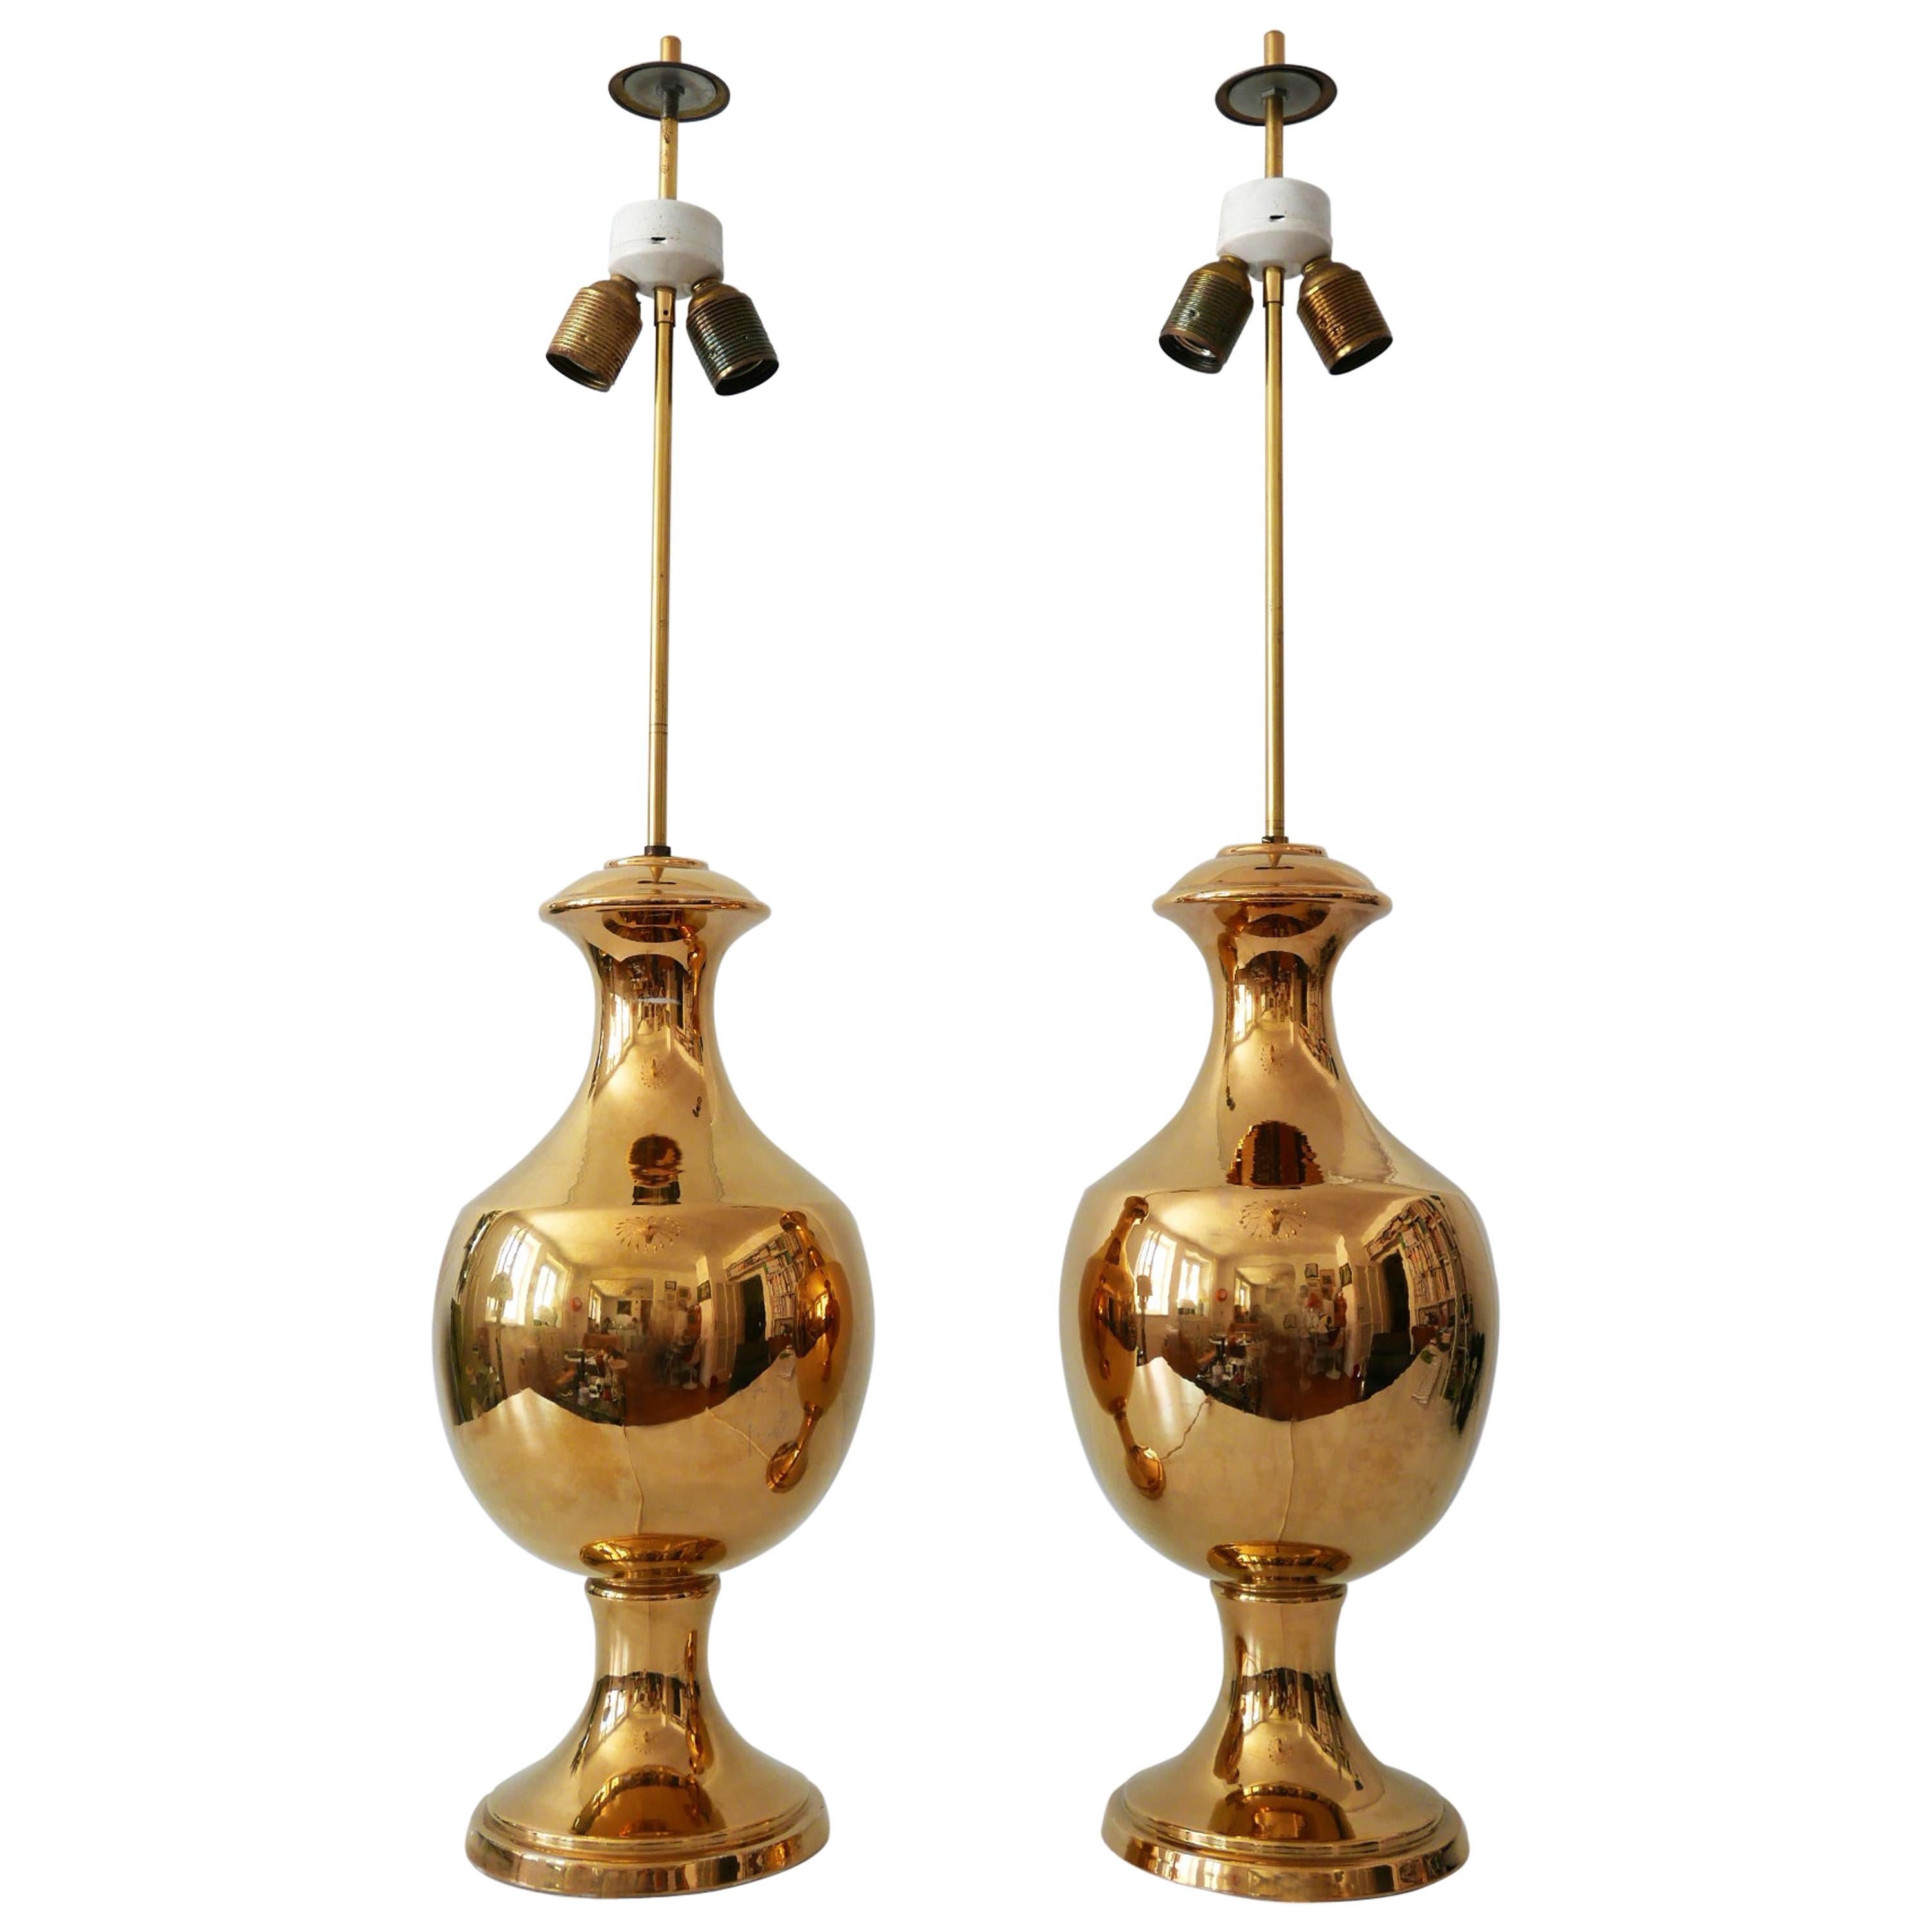 Set of Two Huge Gold Glazed Ceramic Table Lamps by Behreno Firenze 1960s Italy For Sale